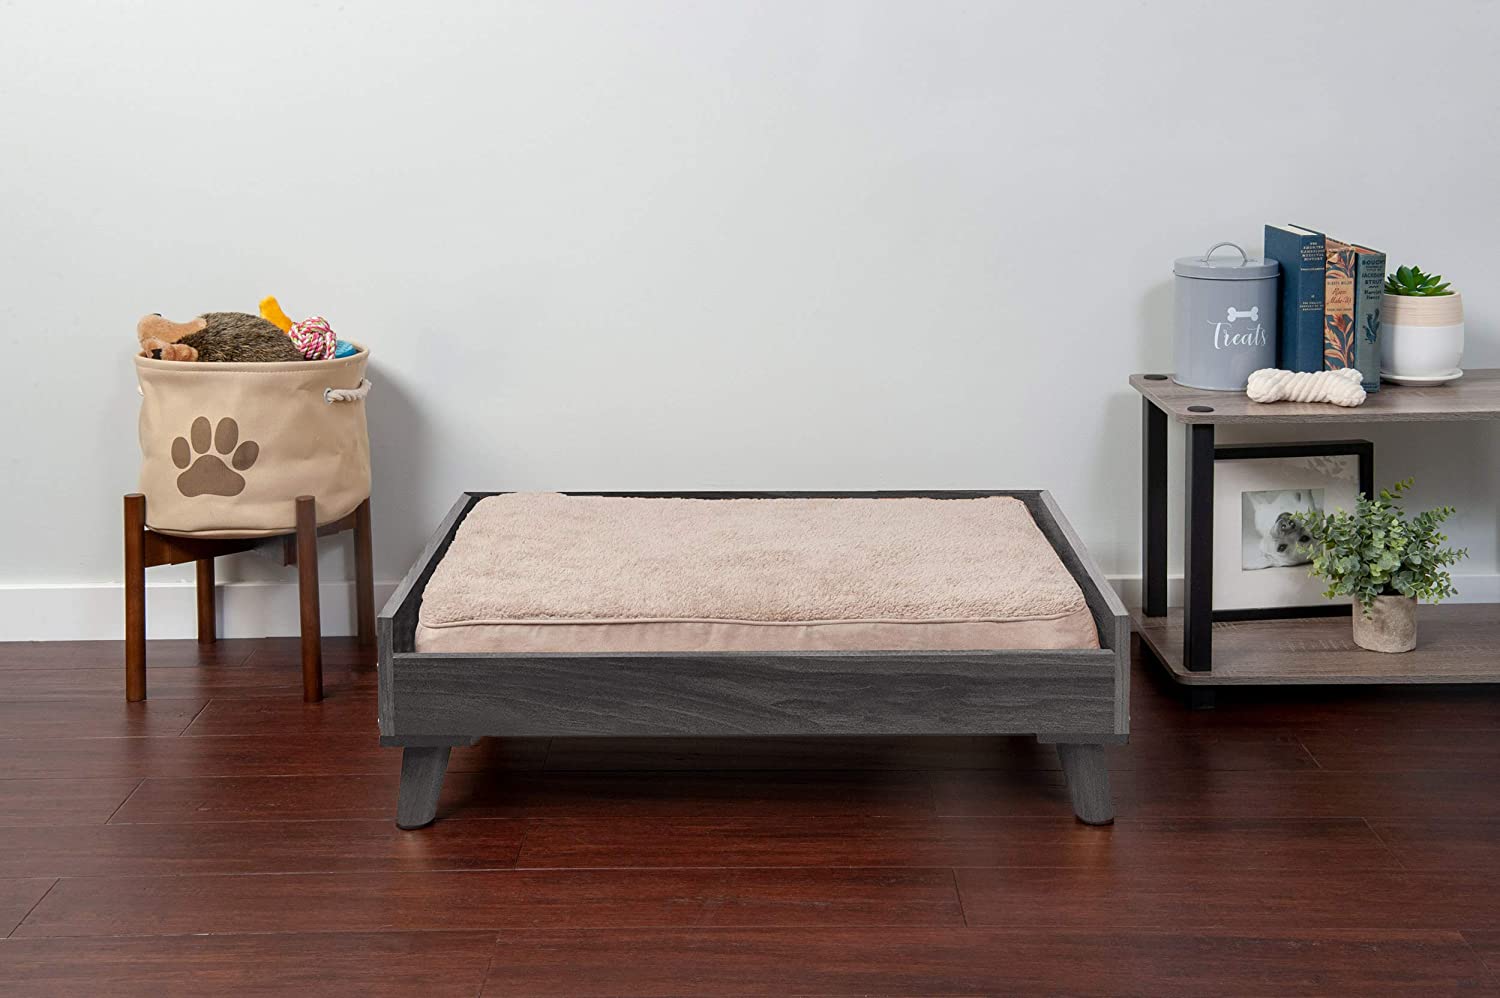 Pet Bed Frame for Small, Medium, and Large Dogs and Cats - Elevated Mid-Century Modern Style Platform Dog Bed